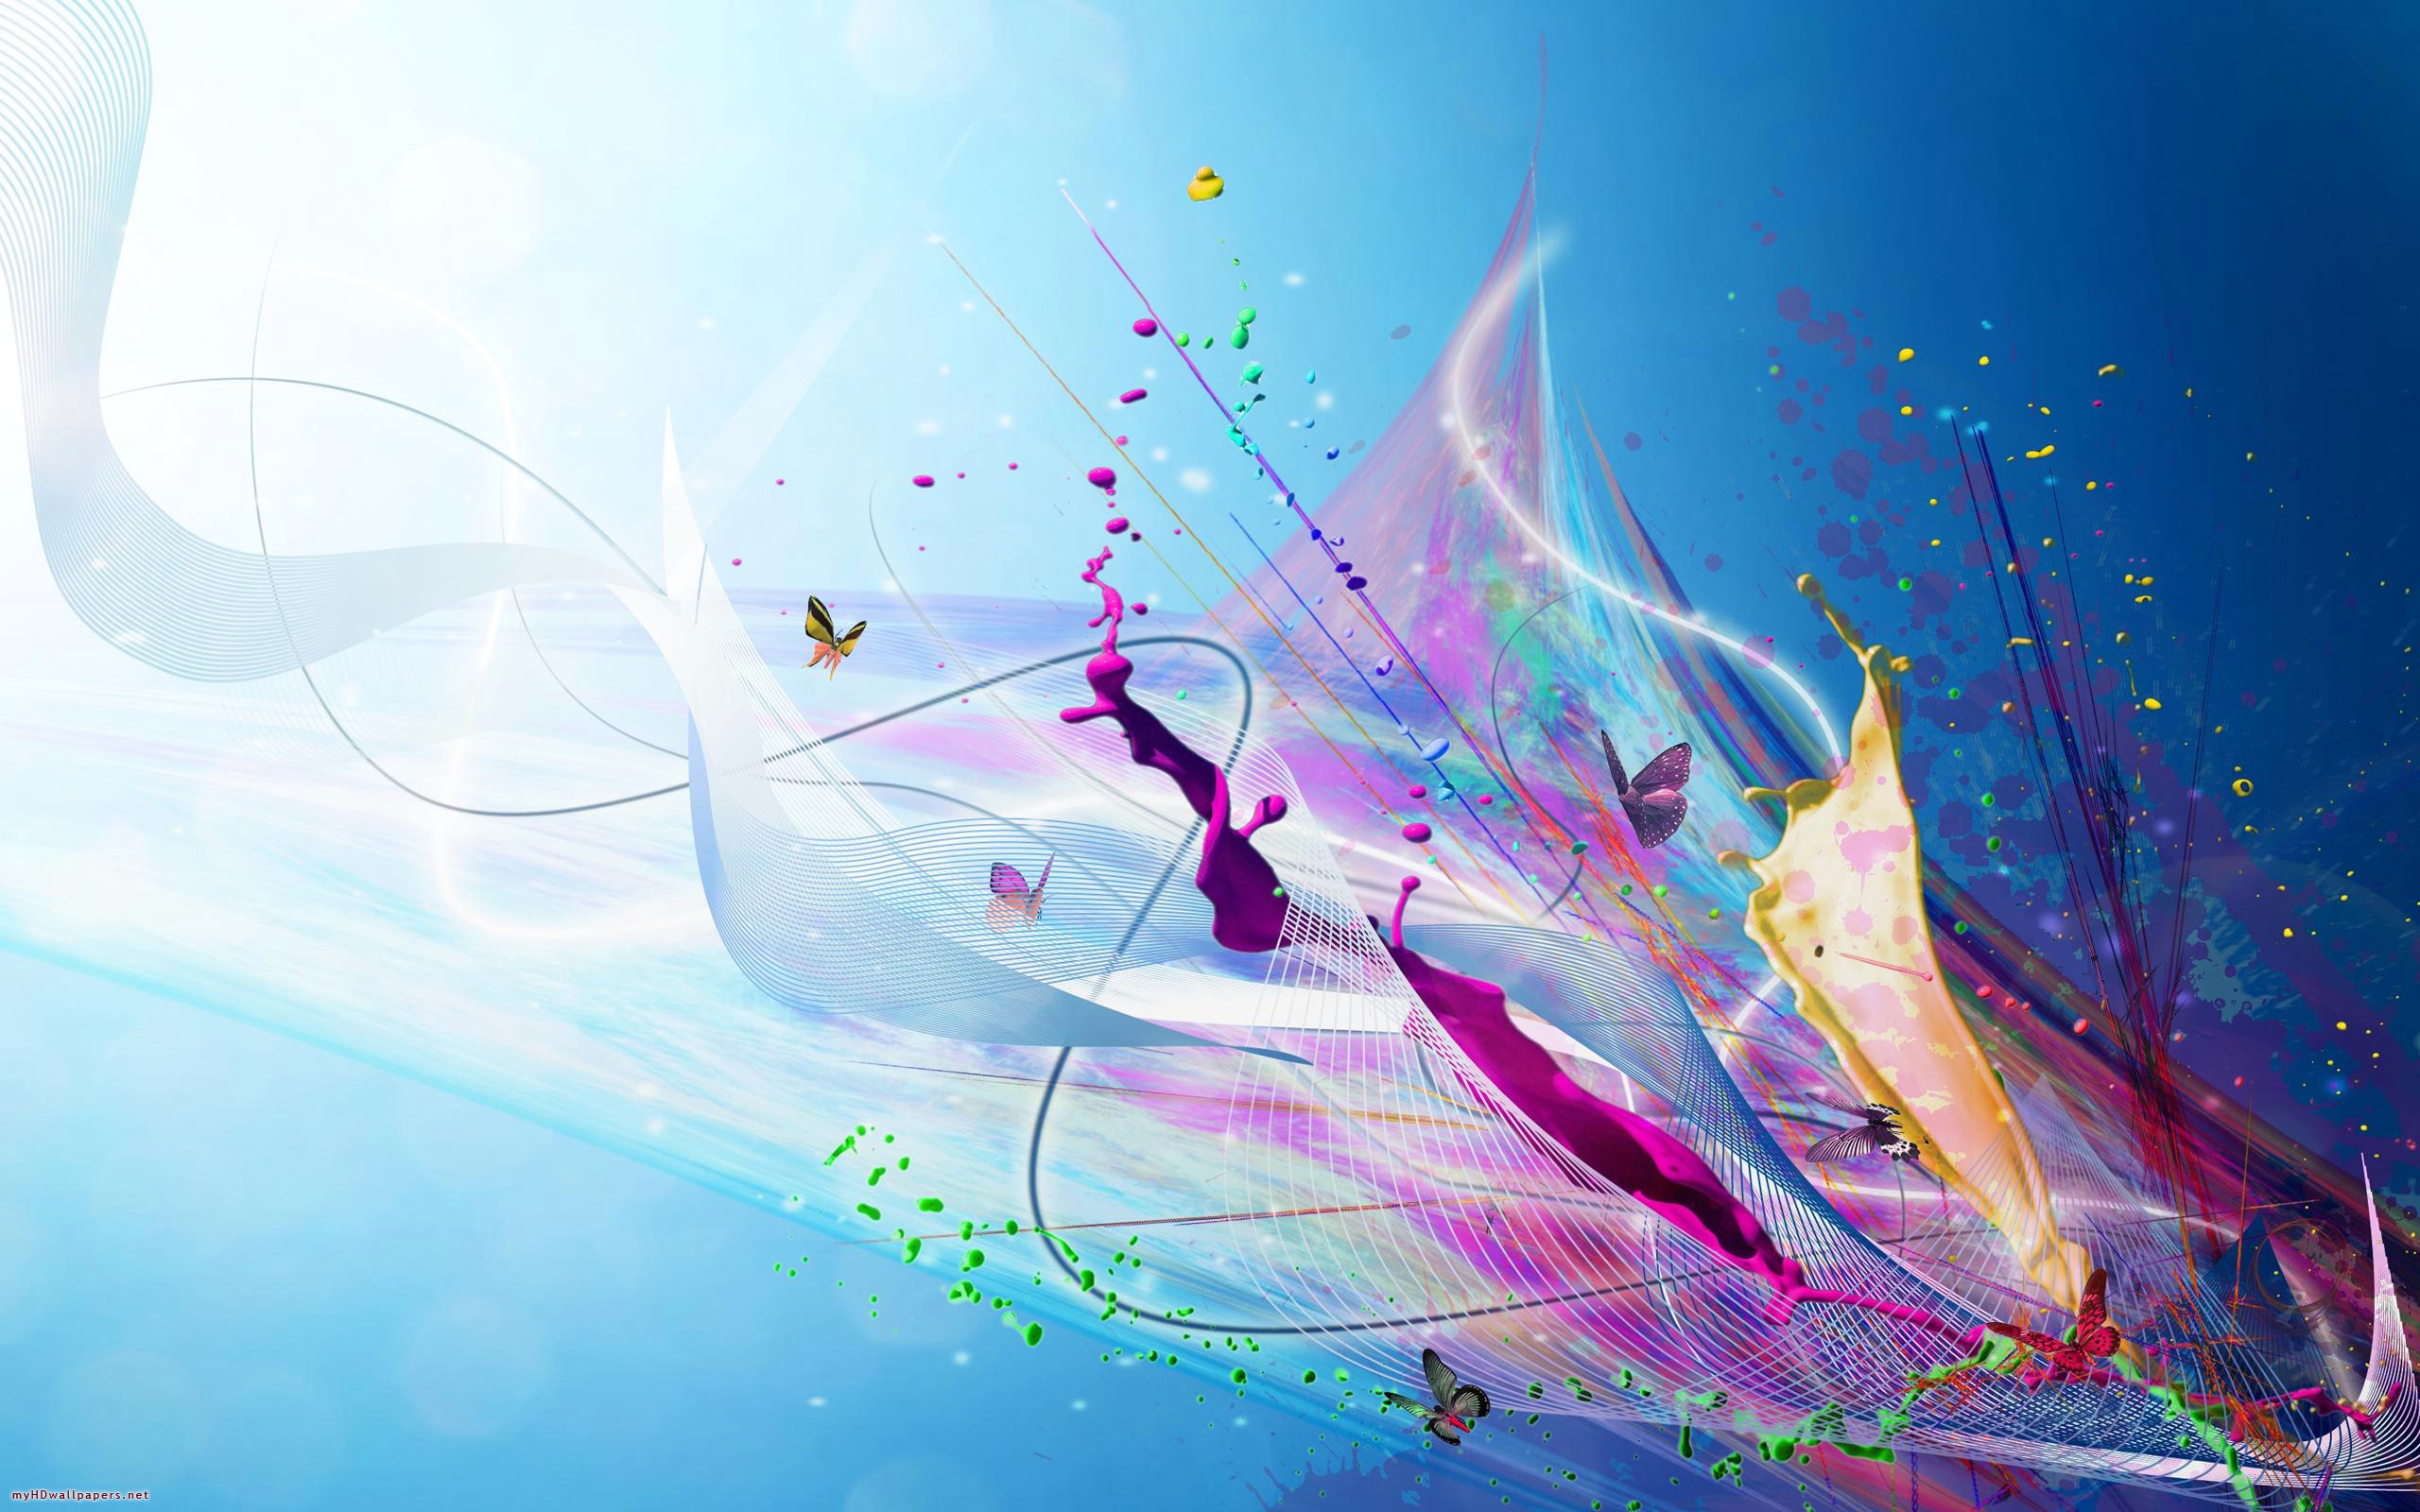 Abstract HD Wallpaper 1080p Which Is Under The